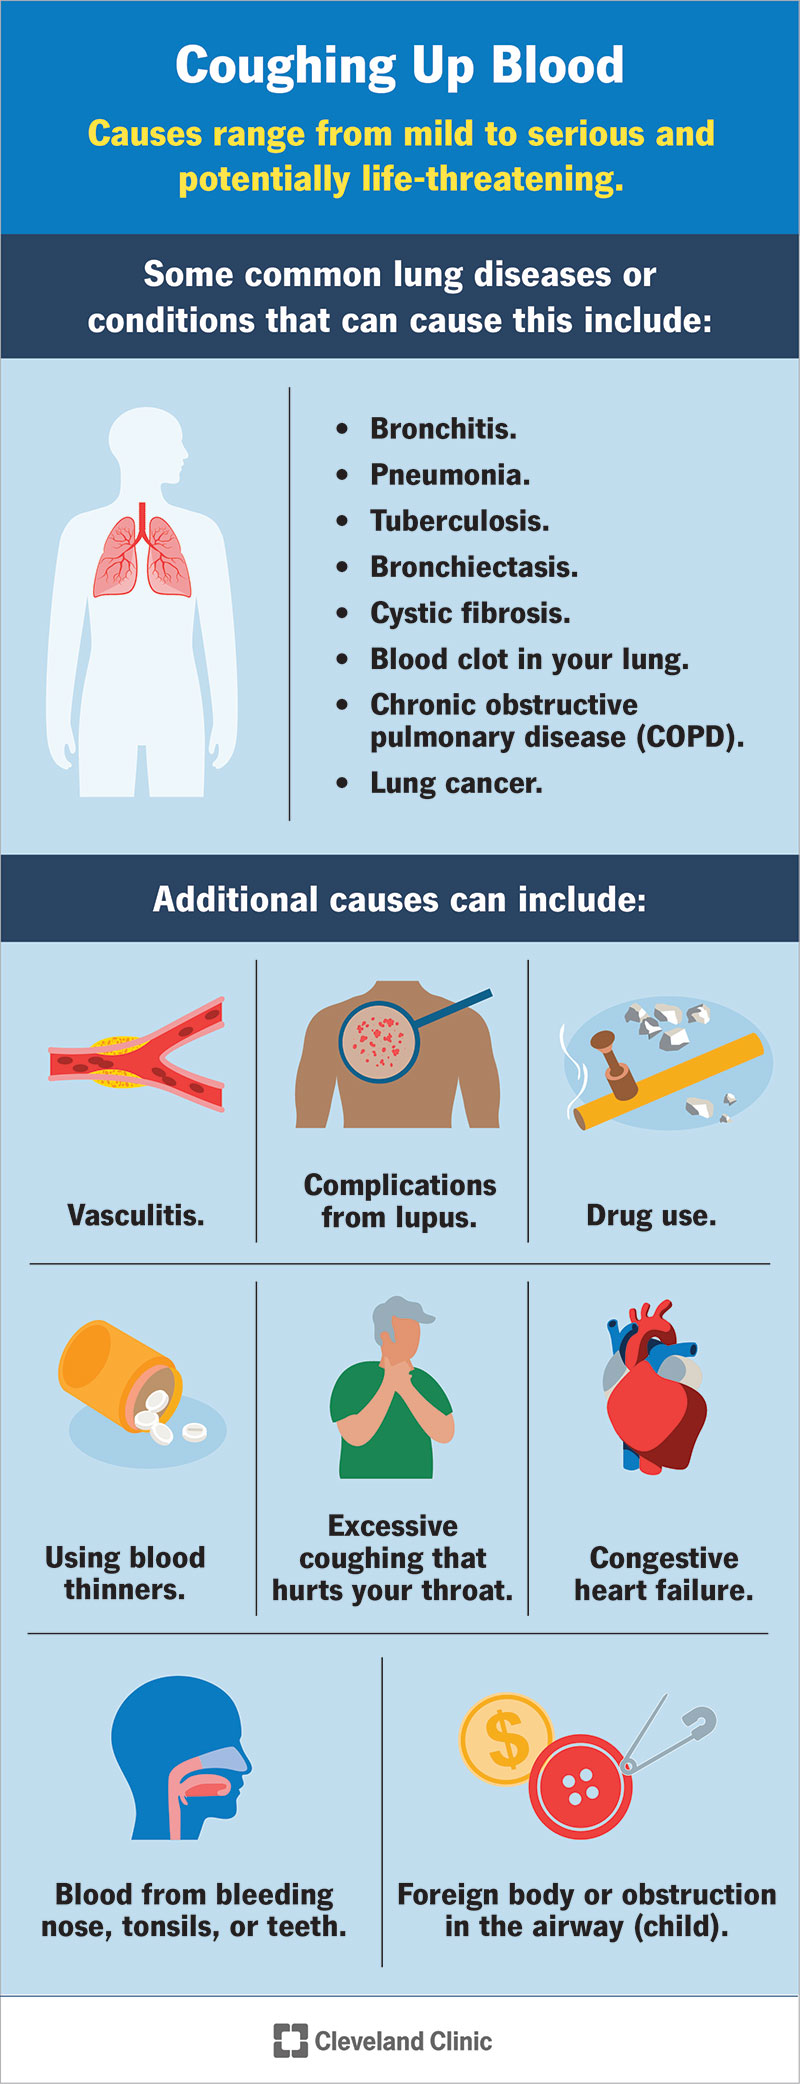 The most common lung conditions and other causes that lead to coughing up blood